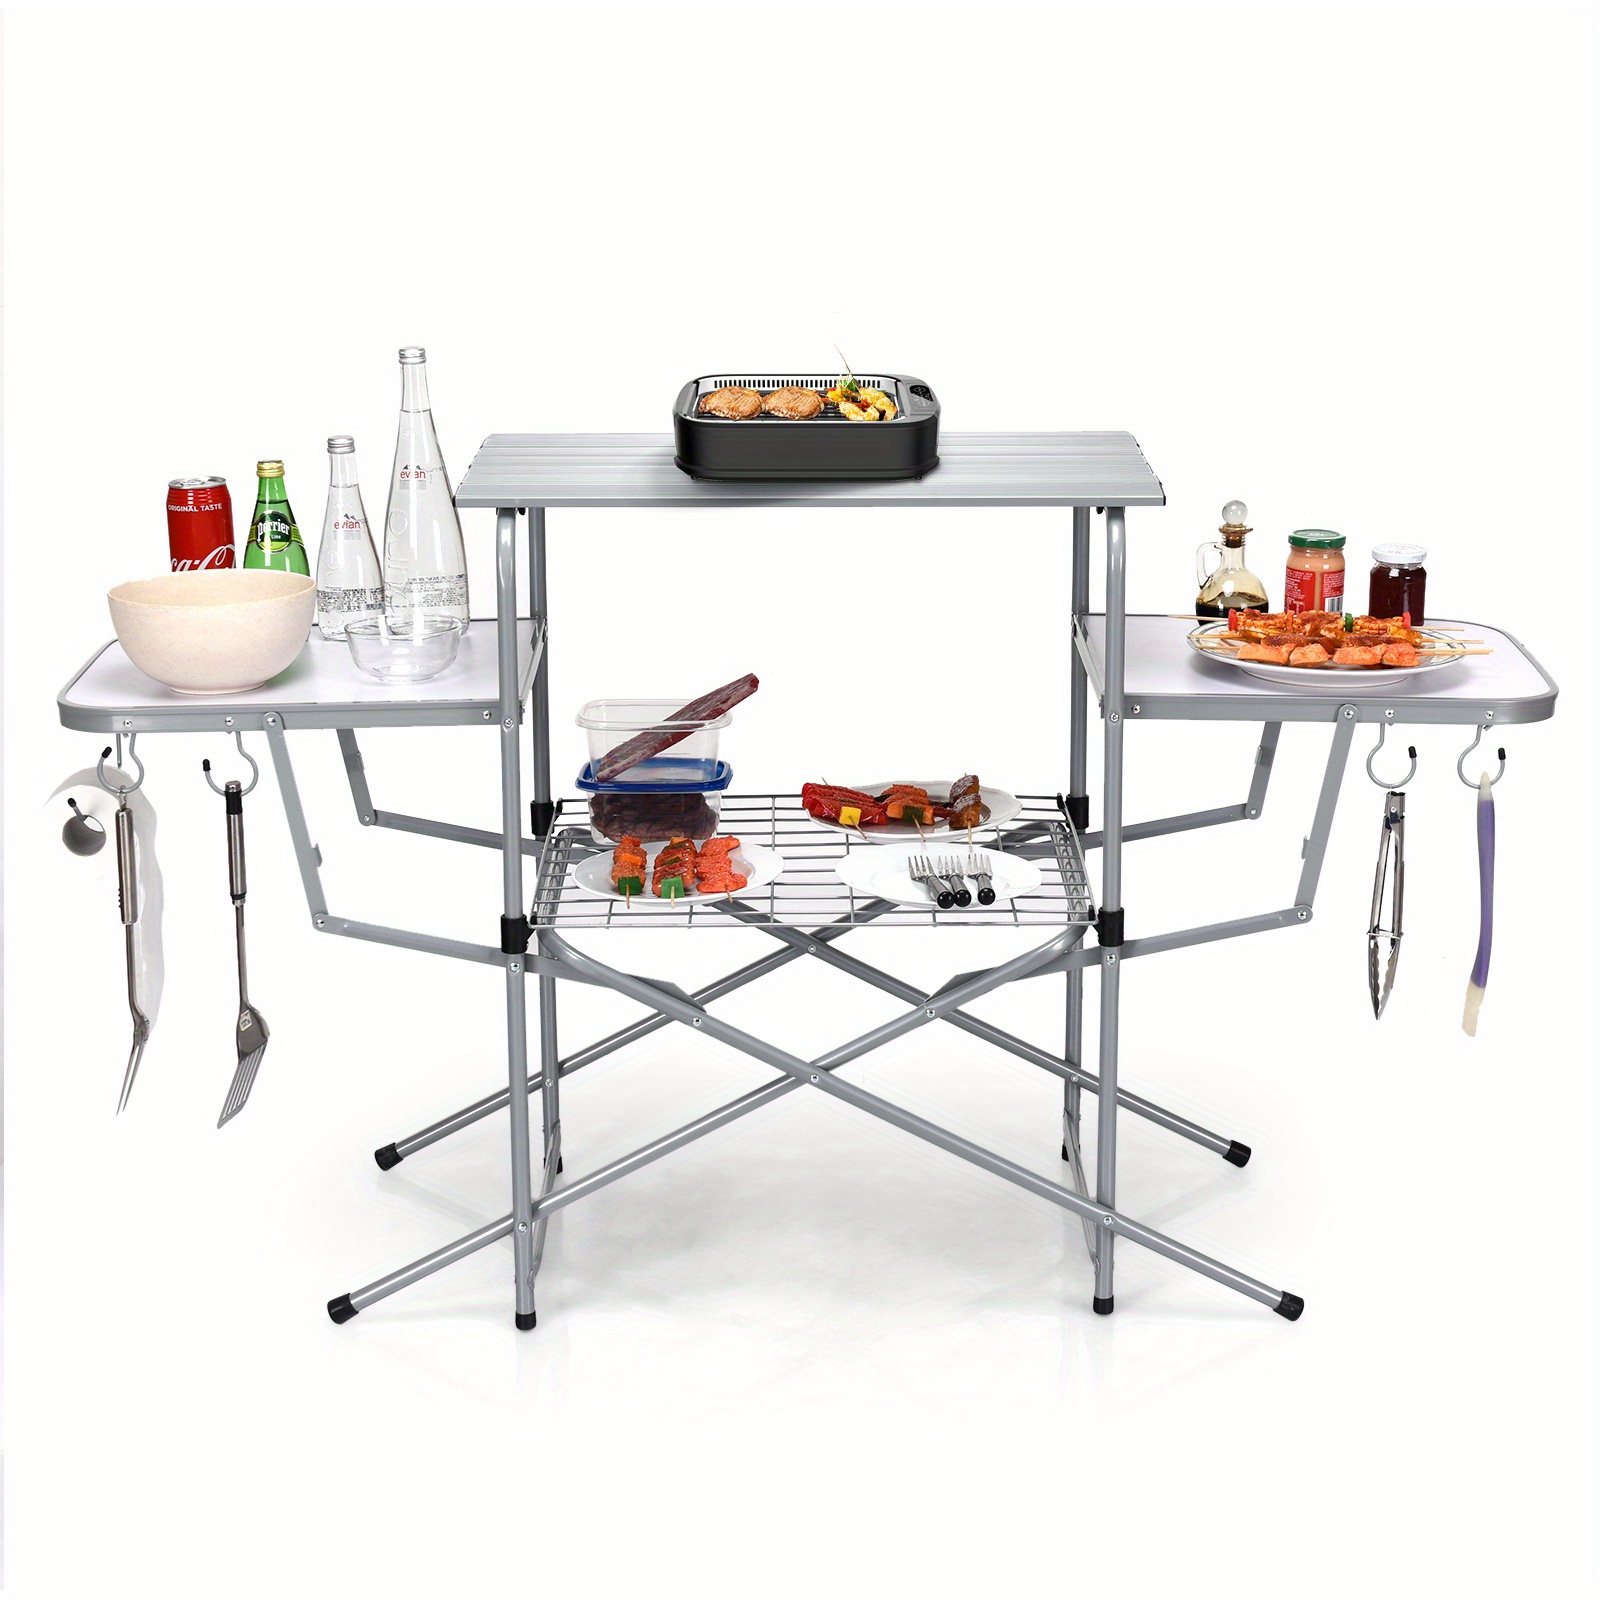 

Lifezeal Foldable Camping Table Outdoor Kitchen Portable Grilling Stand Folding Bbq Table